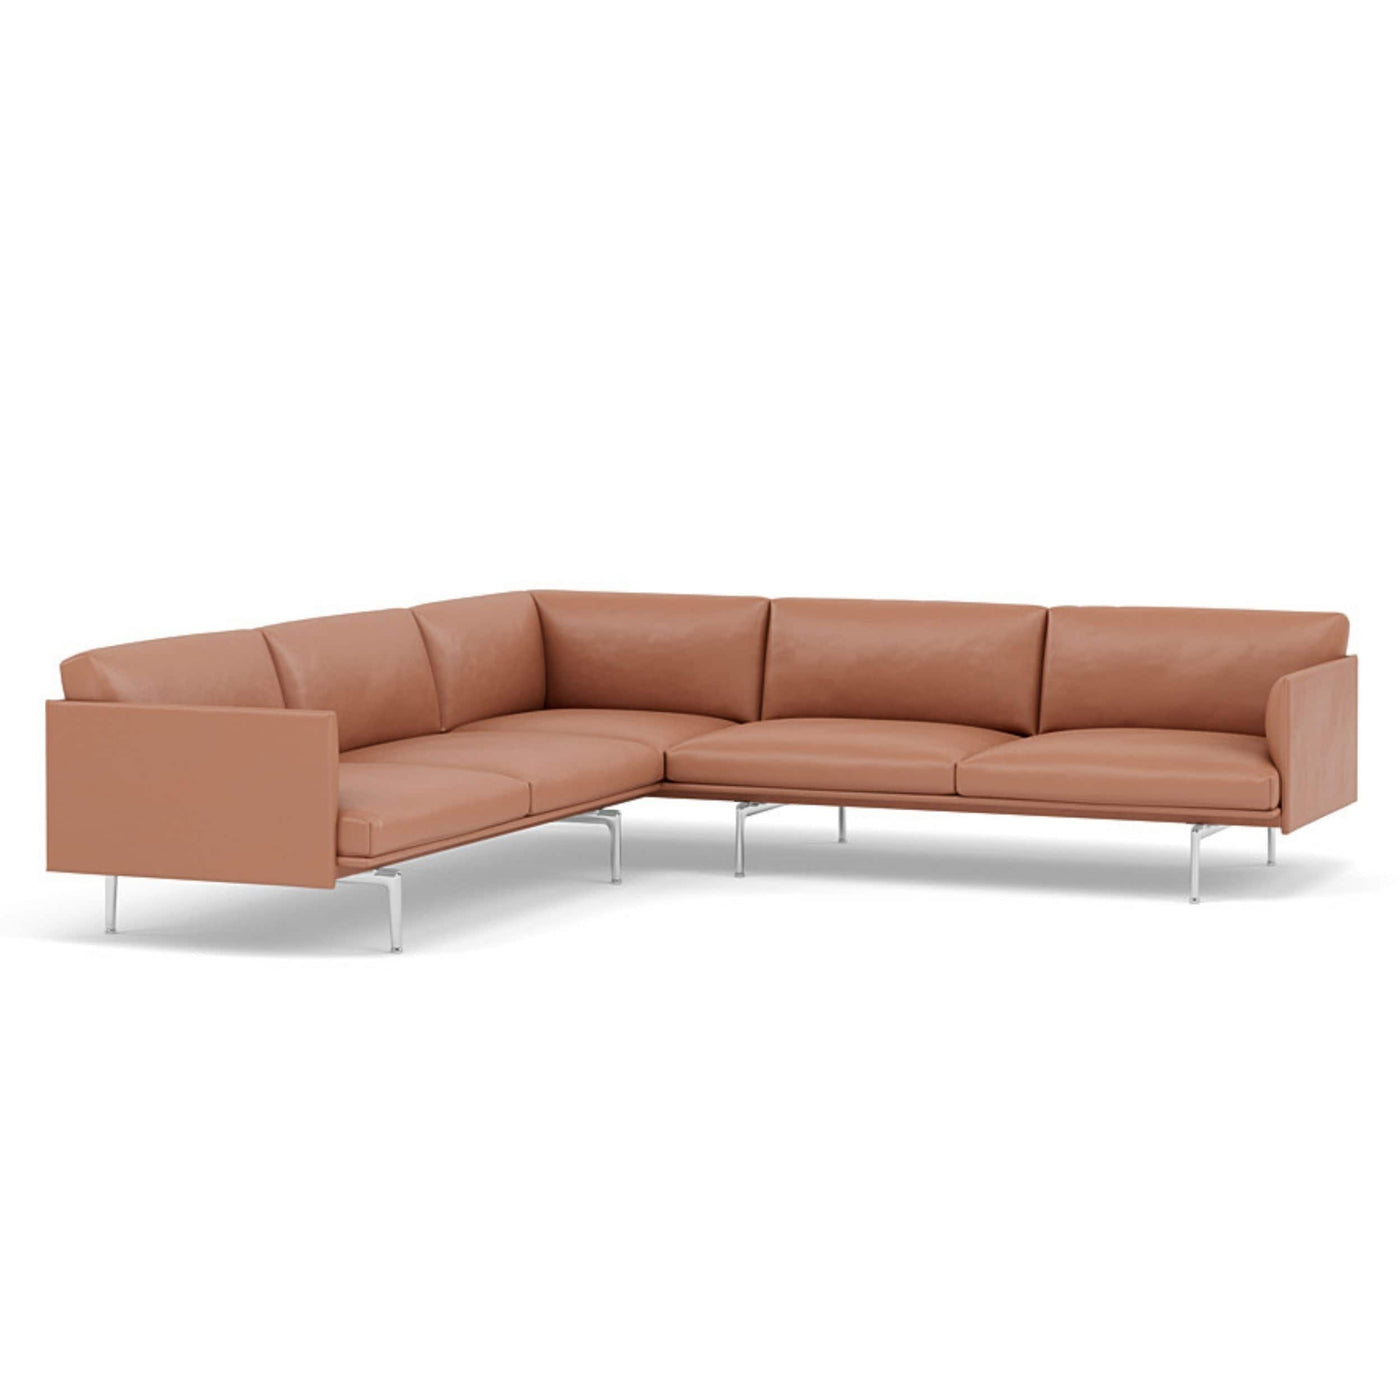 muuto outline corner sofa in cognac refine leather and polished aluminium legs. Made to order from someday designs. #colour_cognac-refine-leather